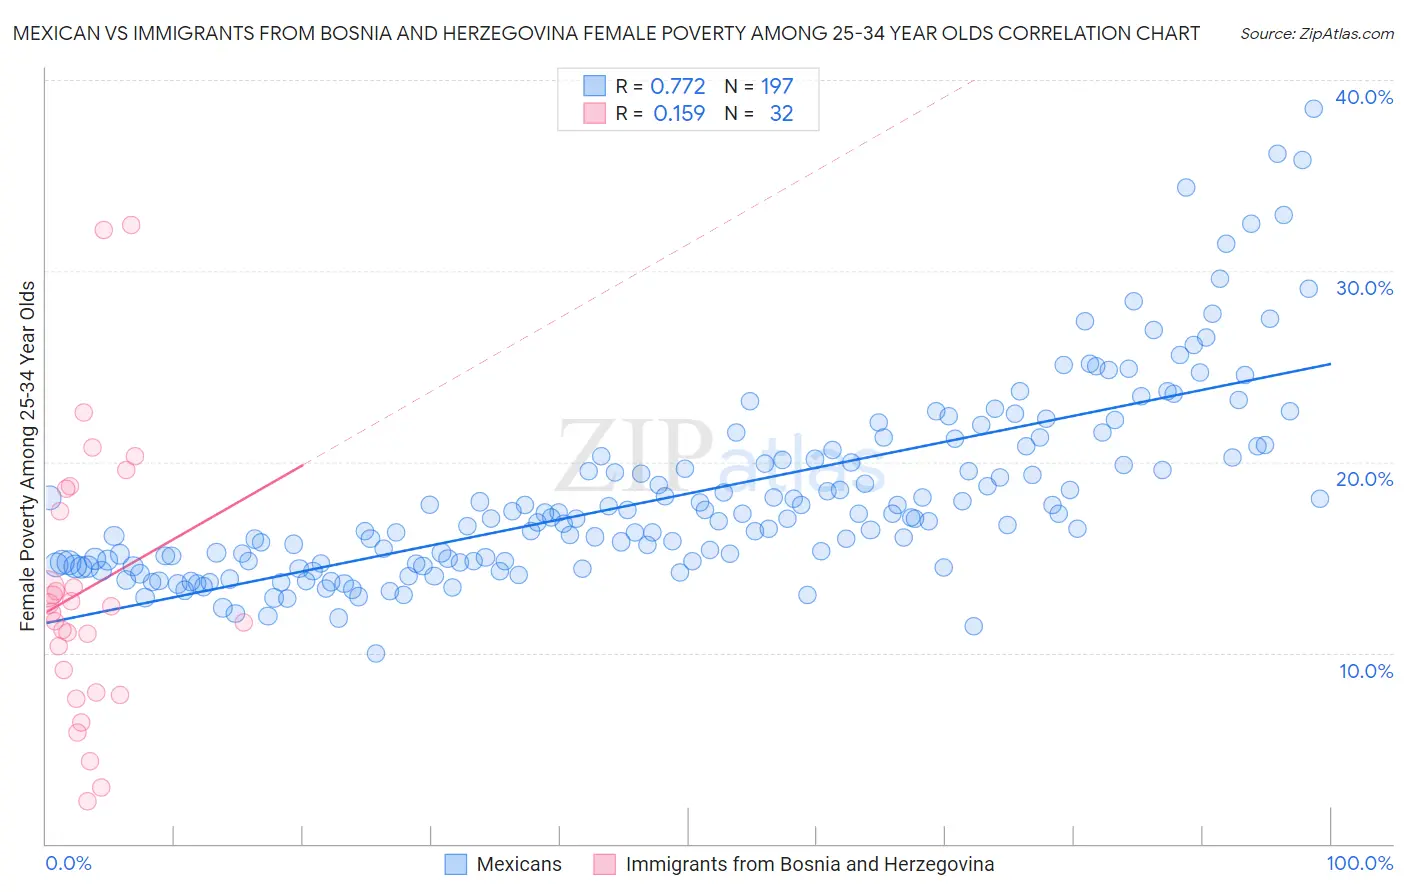 Mexican vs Immigrants from Bosnia and Herzegovina Female Poverty Among 25-34 Year Olds